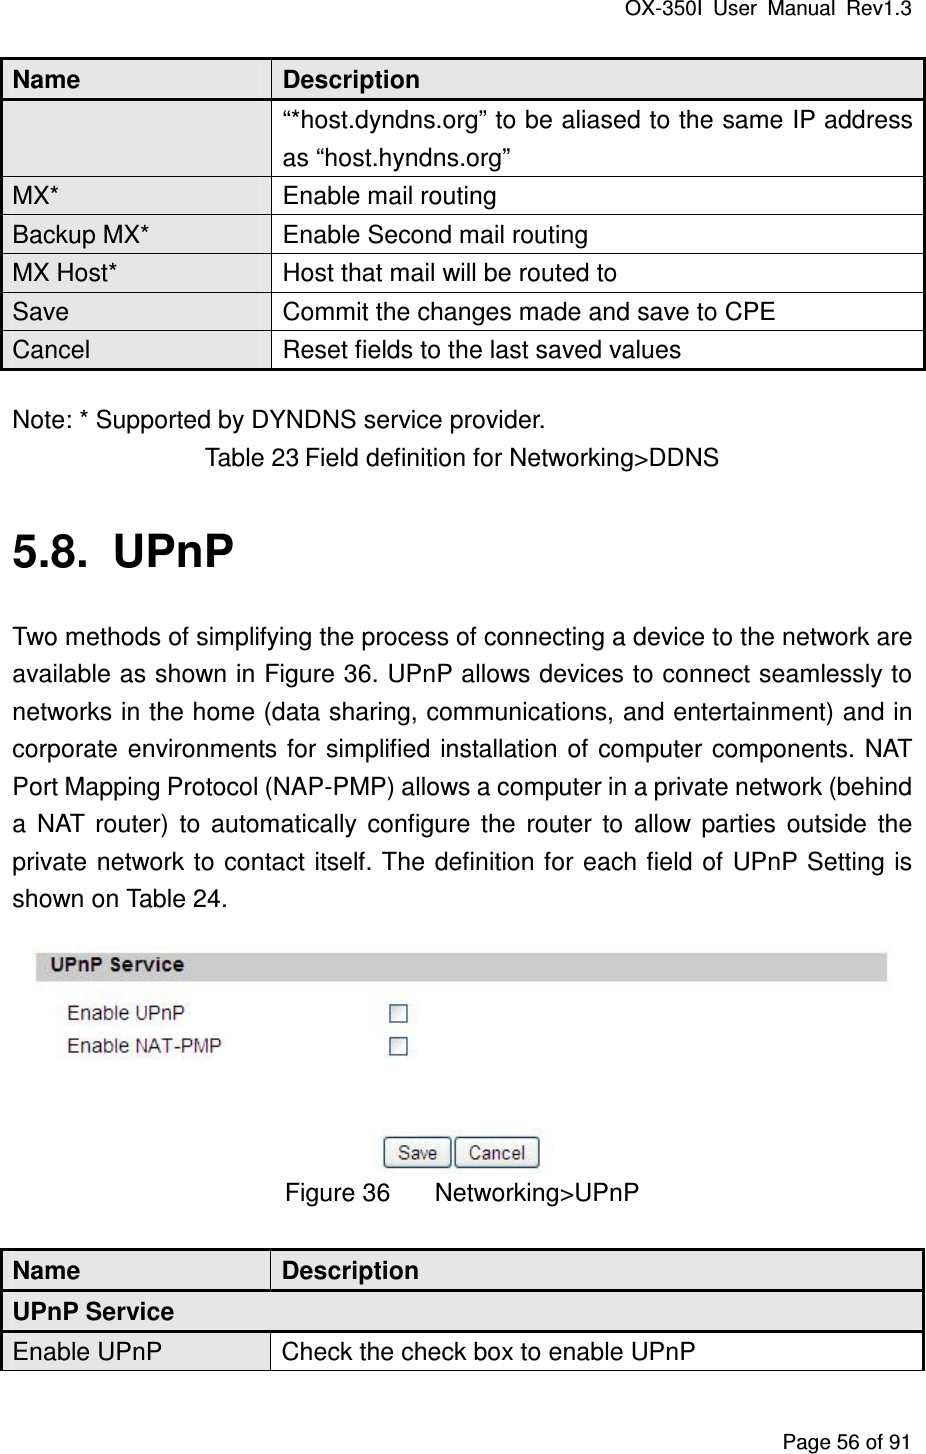 OX-350I  User  Manual  Rev1.3 Page 56 of 91 Name  Description “*host.dyndns.org” to be aliased to the same IP address as “host.hyndns.org” MX*  Enable mail routing Backup MX*  Enable Second mail routing MX Host*  Host that mail will be routed to Save  Commit the changes made and save to CPE Cancel  Reset fields to the last saved values Note: * Supported by DYNDNS service provider. Table 23 Field definition for Networking&gt;DDNS 5.8.  UPnP Two methods of simplifying the process of connecting a device to the network are available as shown in Figure 36. UPnP allows devices to connect seamlessly to networks in the home (data sharing, communications, and entertainment) and in corporate  environments for simplified  installation of computer components. NAT Port Mapping Protocol (NAP-PMP) allows a computer in a private network (behind a  NAT  router)  to  automatically  configure  the  router  to  allow  parties  outside  the private network to contact itself. The definition for each field of UPnP Setting is shown on Table 24.  Figure 36  Networking&gt;UPnP Name  Description UPnP Service Enable UPnP  Check the check box to enable UPnP 